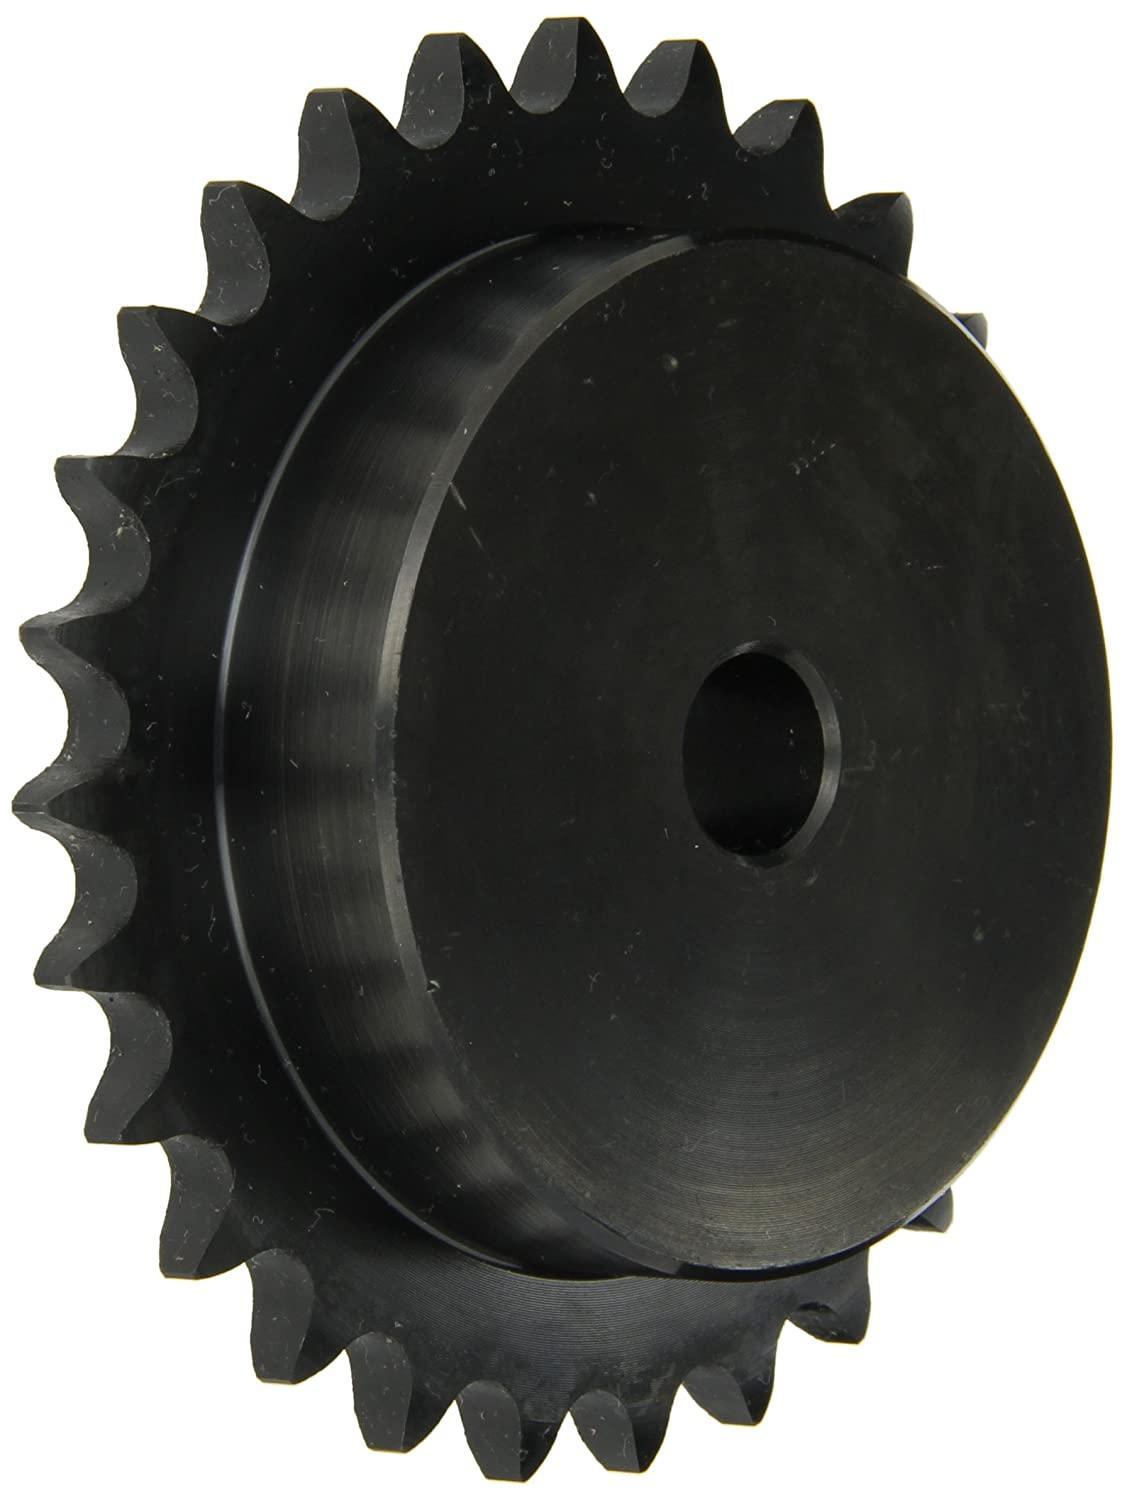 25B54 Roller Chain Sprocket With Stock Bore - Forces Inc